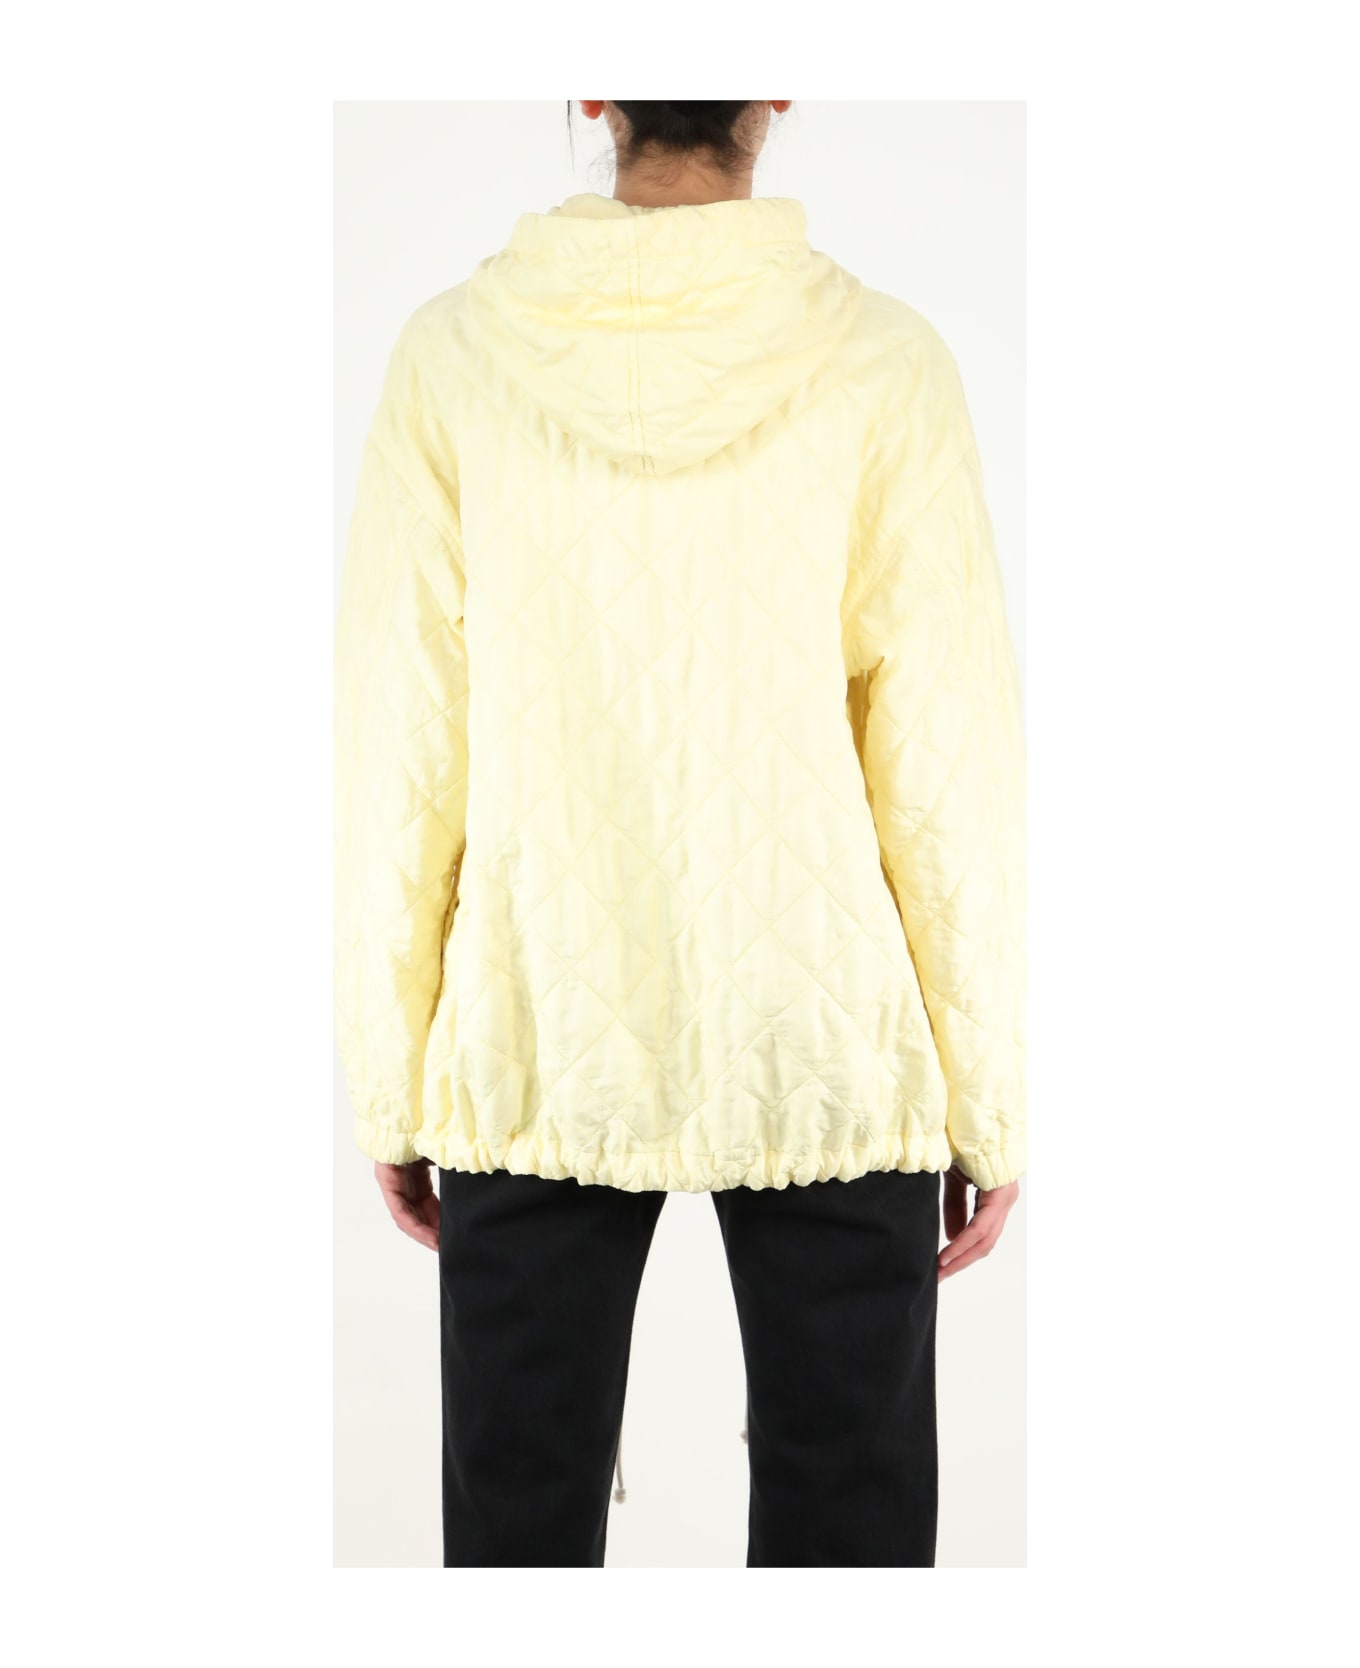 Jil Sander Yellow Quilted Jacket - YELLOW